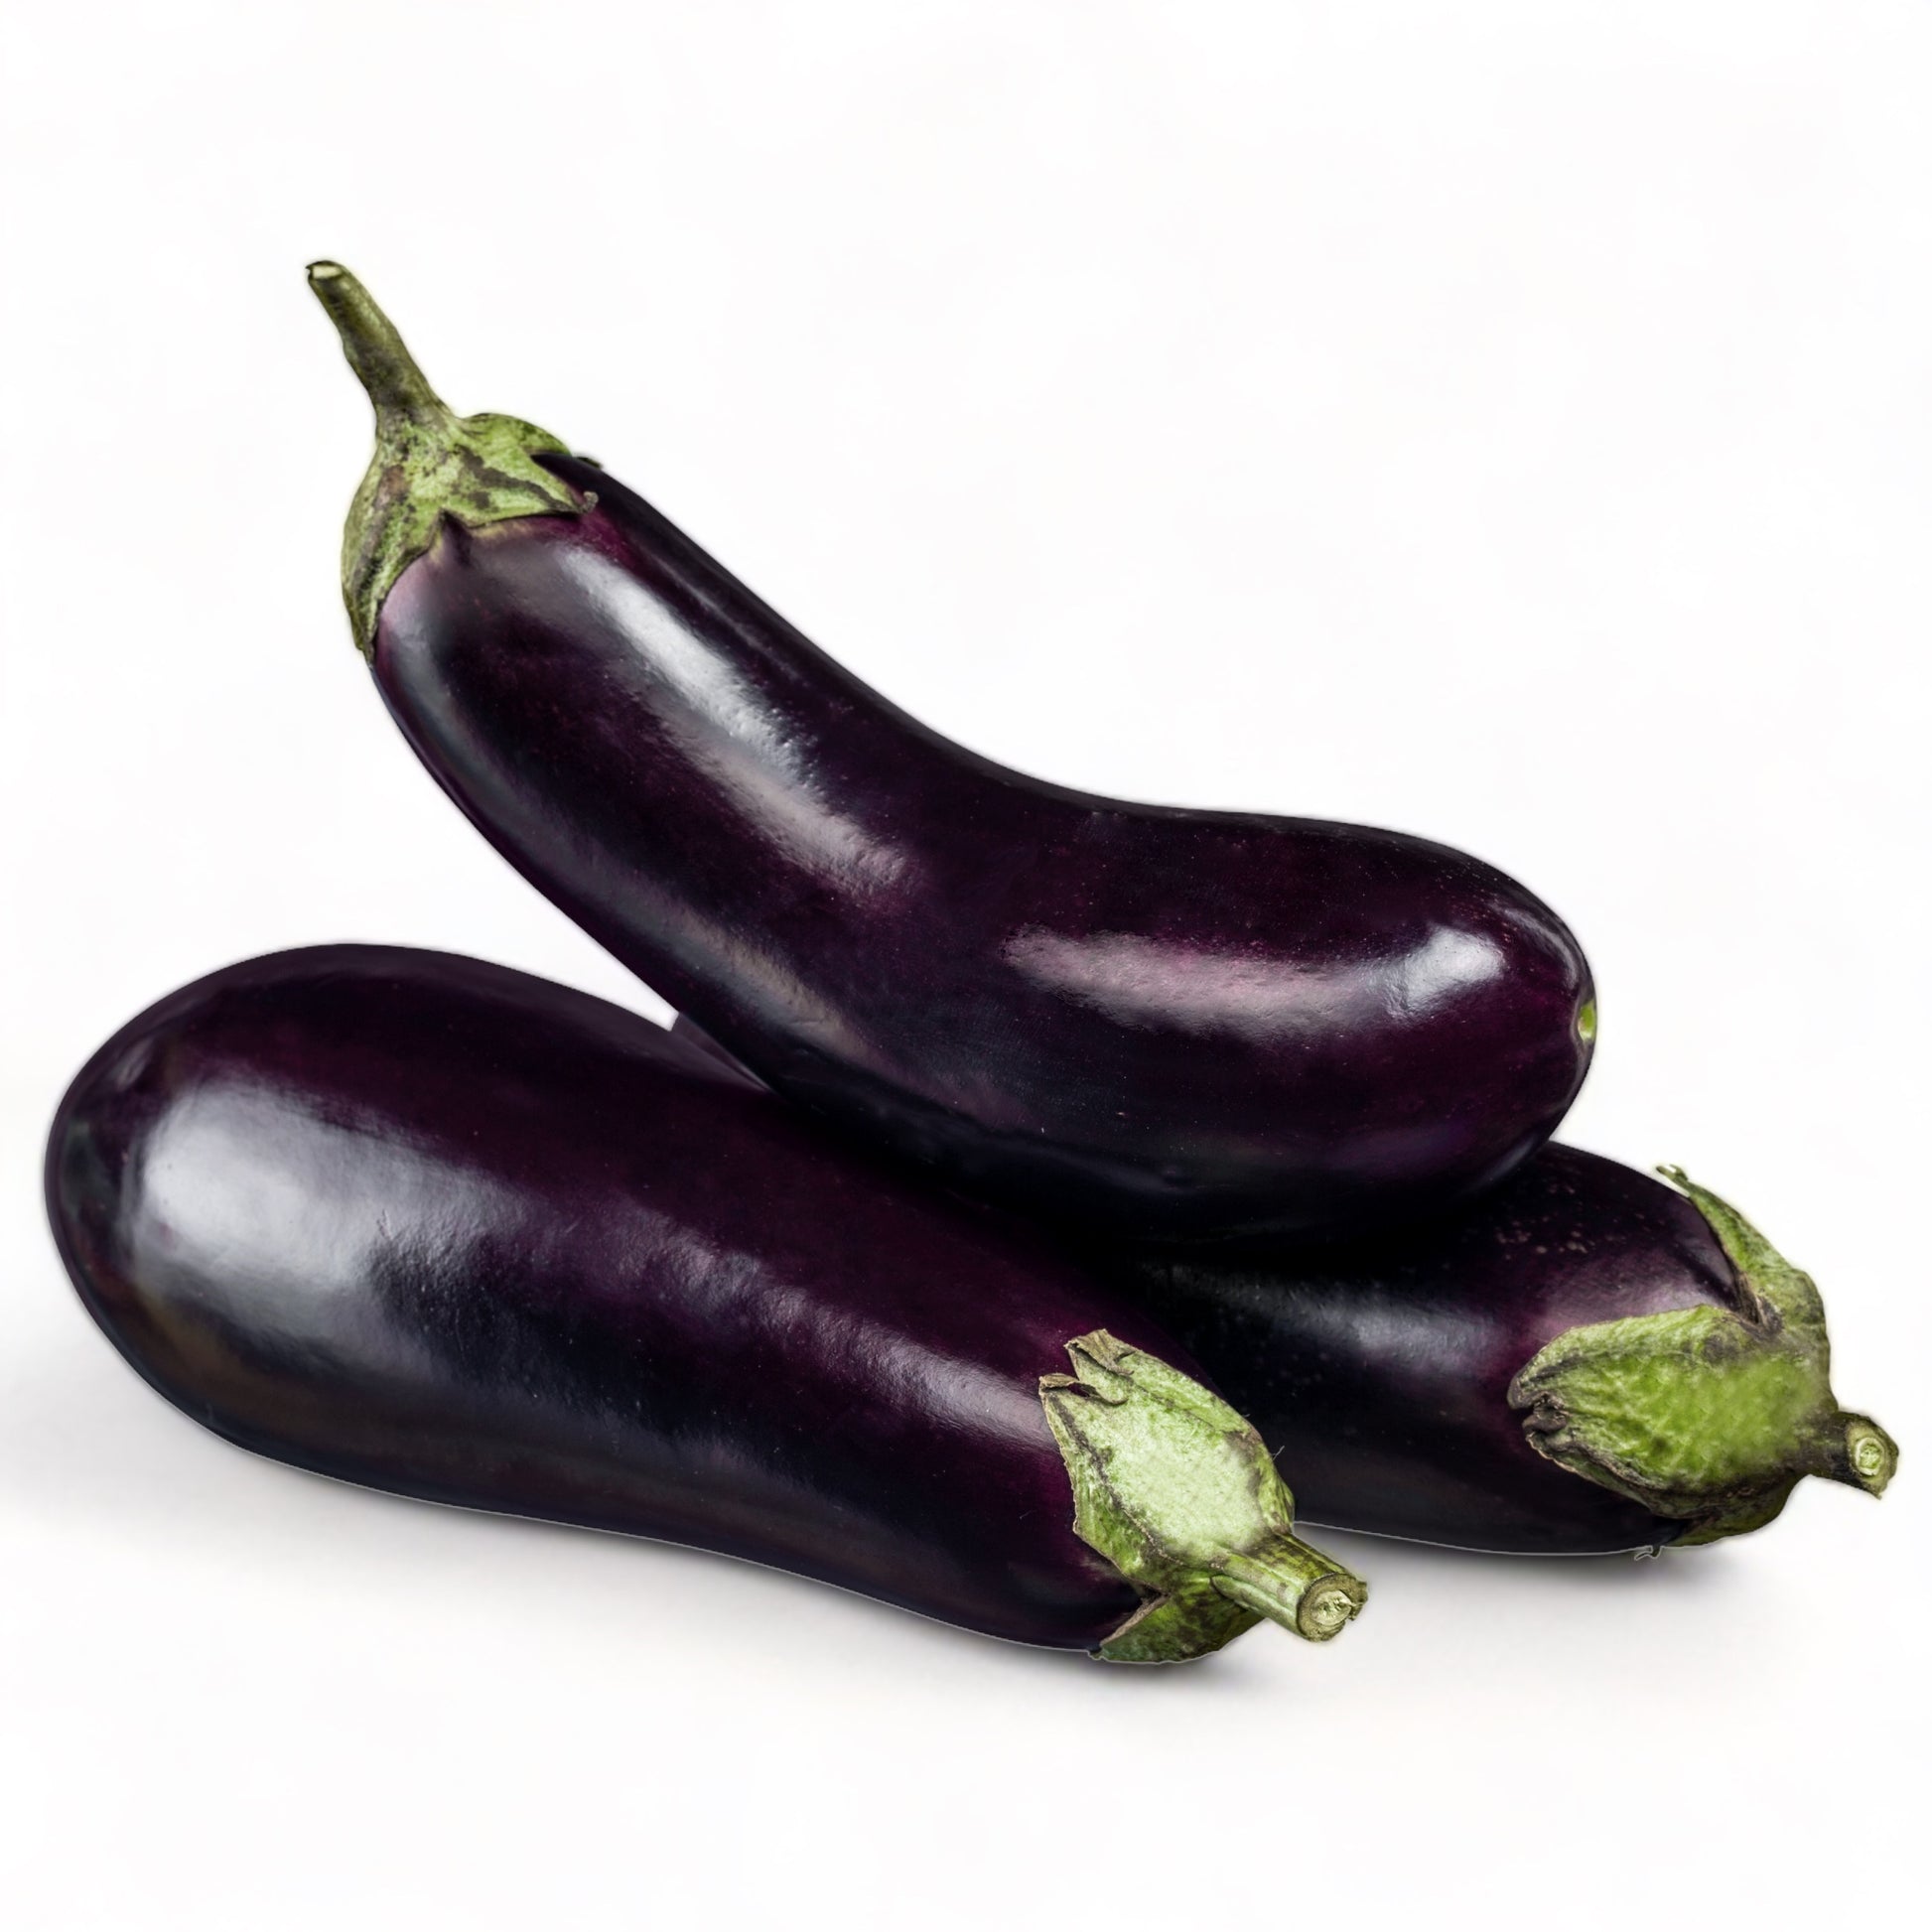 Three fully grown Black Beauty eggplants against a white backdrop